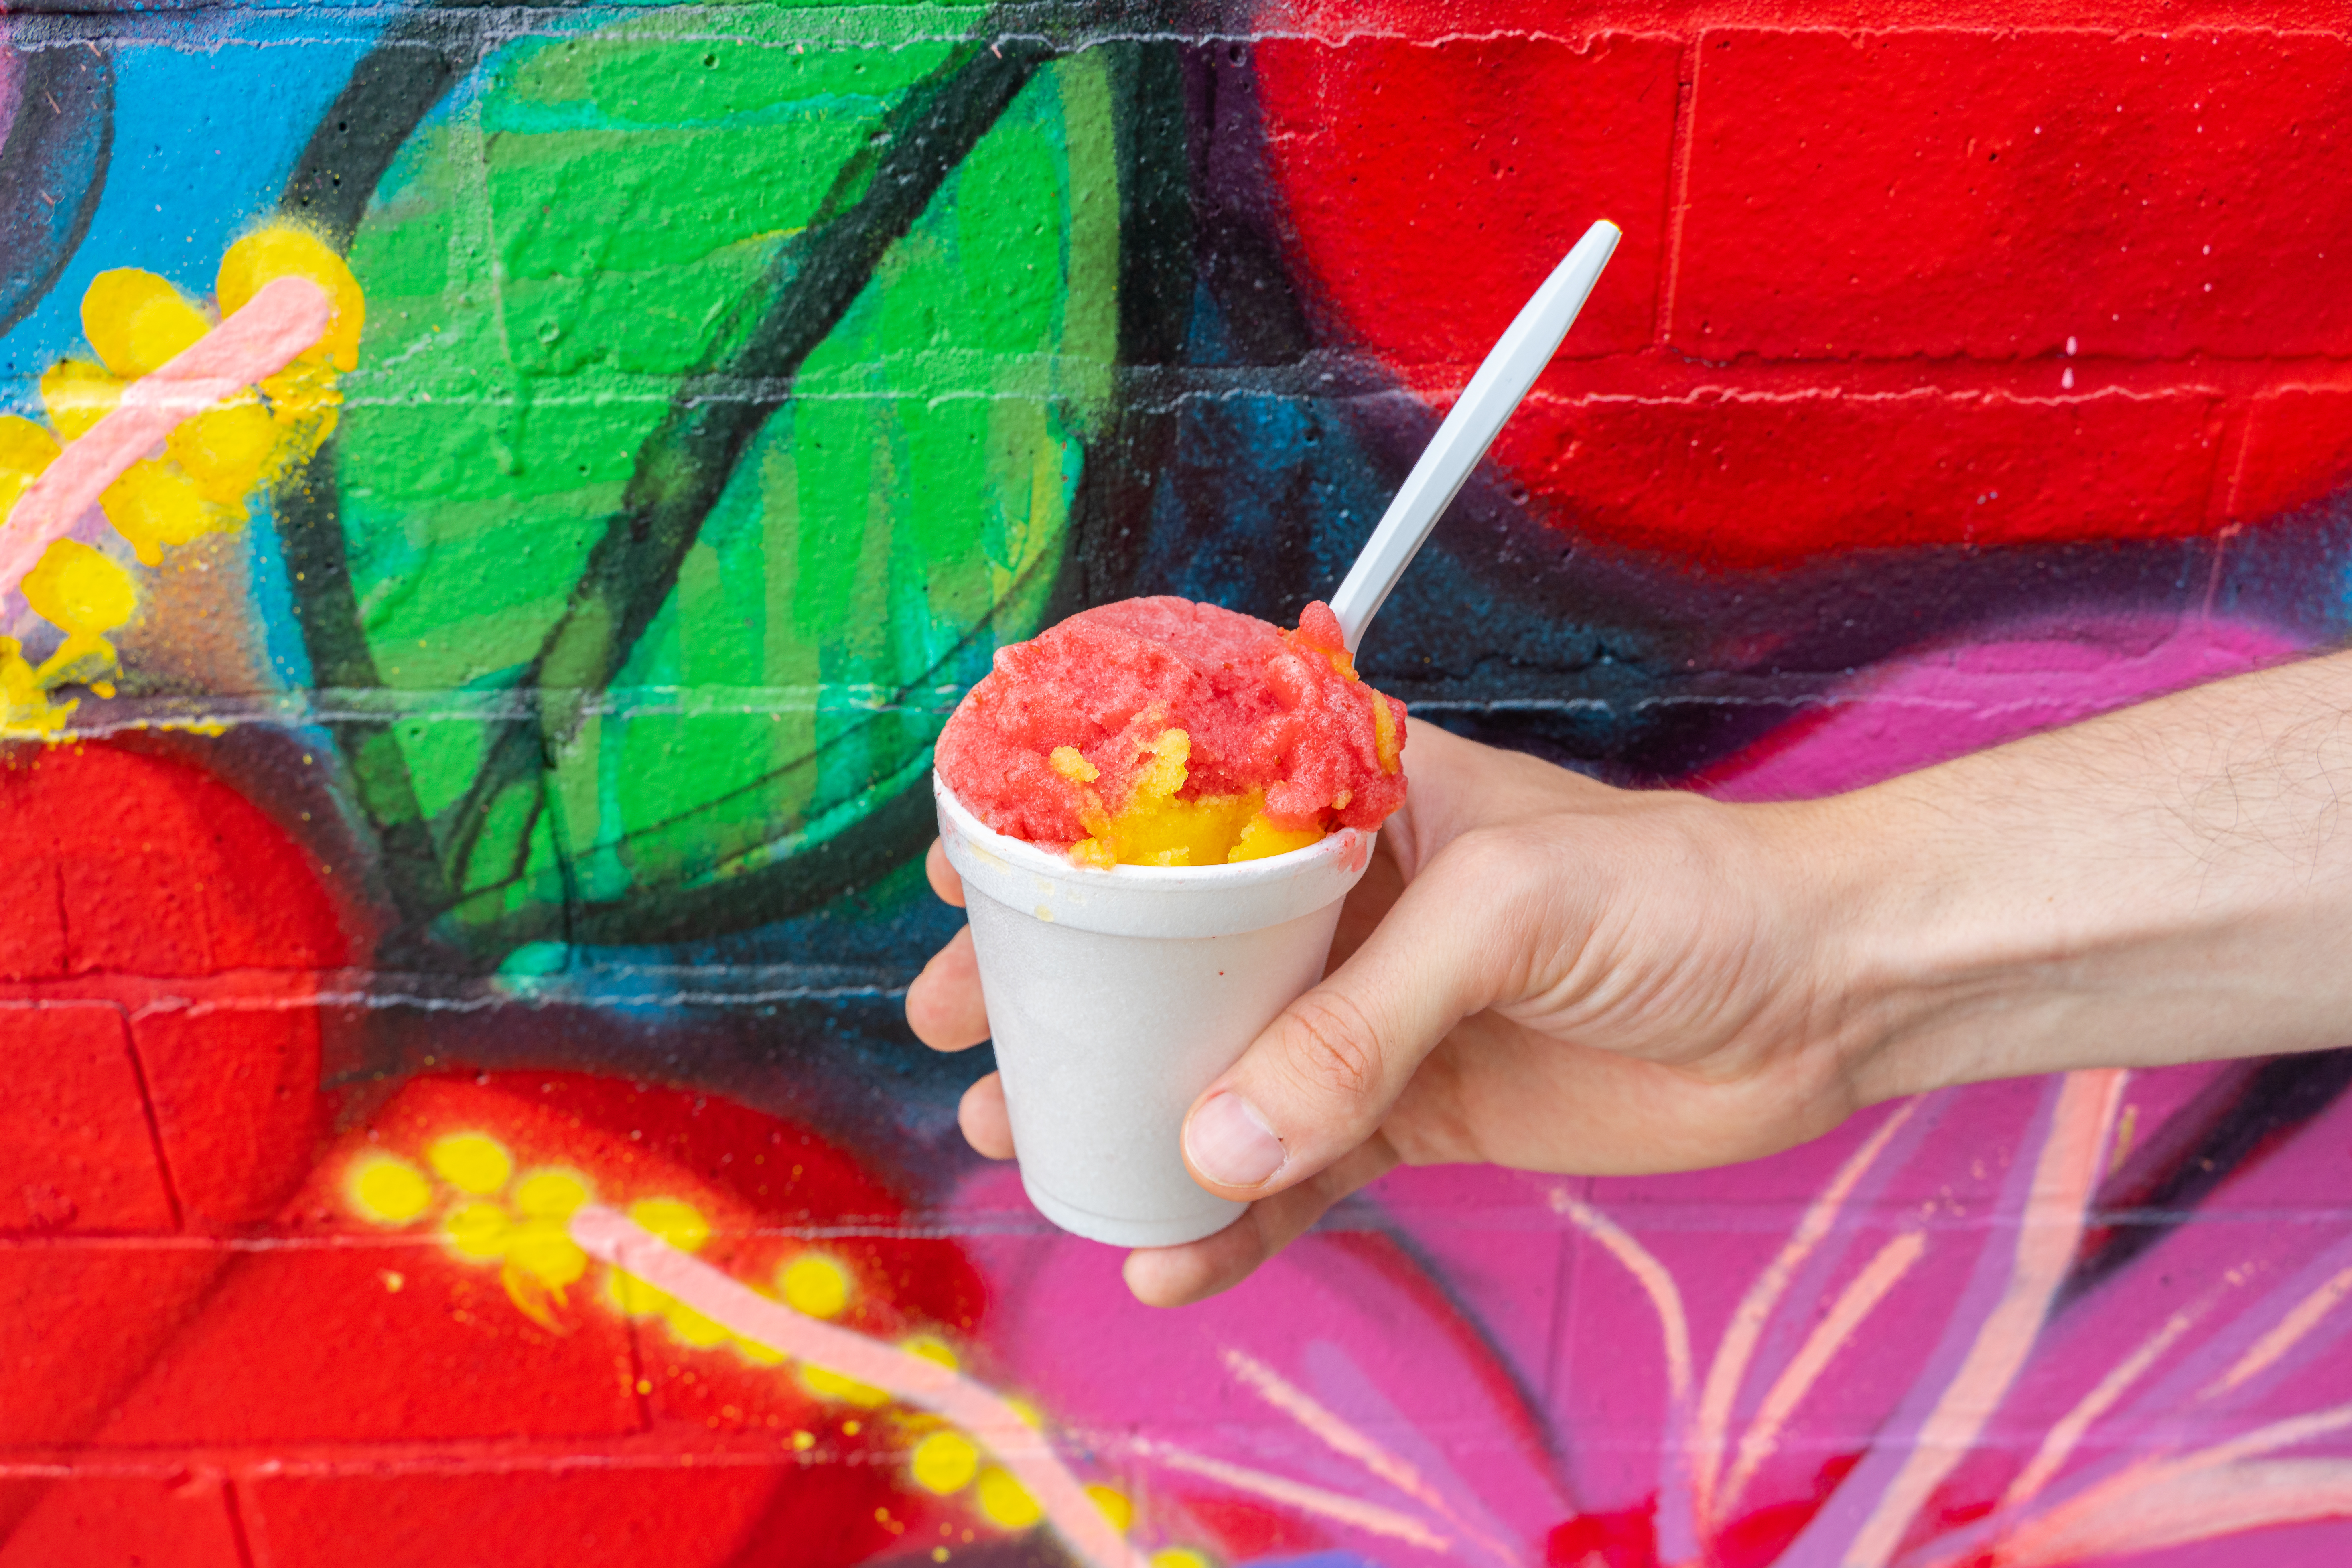 A hand holds a white styrofoam cup of red and yellow Italian ice in front of a colorful wall mural.